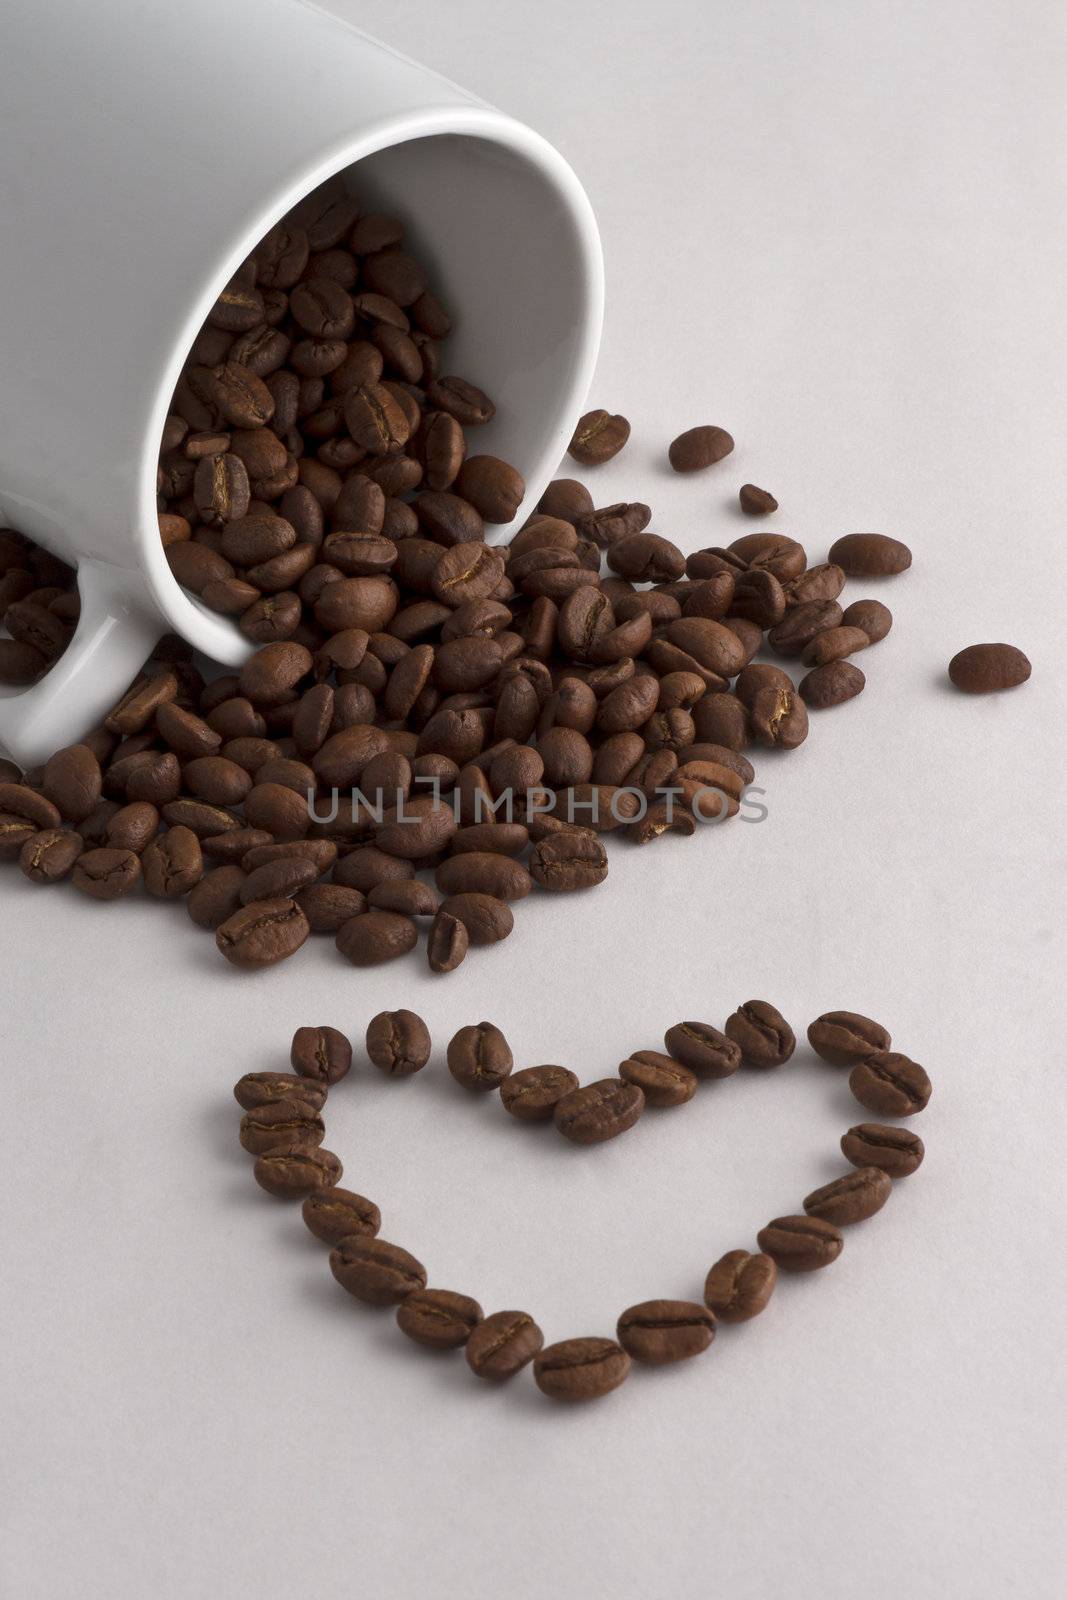 A coffee cup, coffee beans and a heart of coffee beans on white background